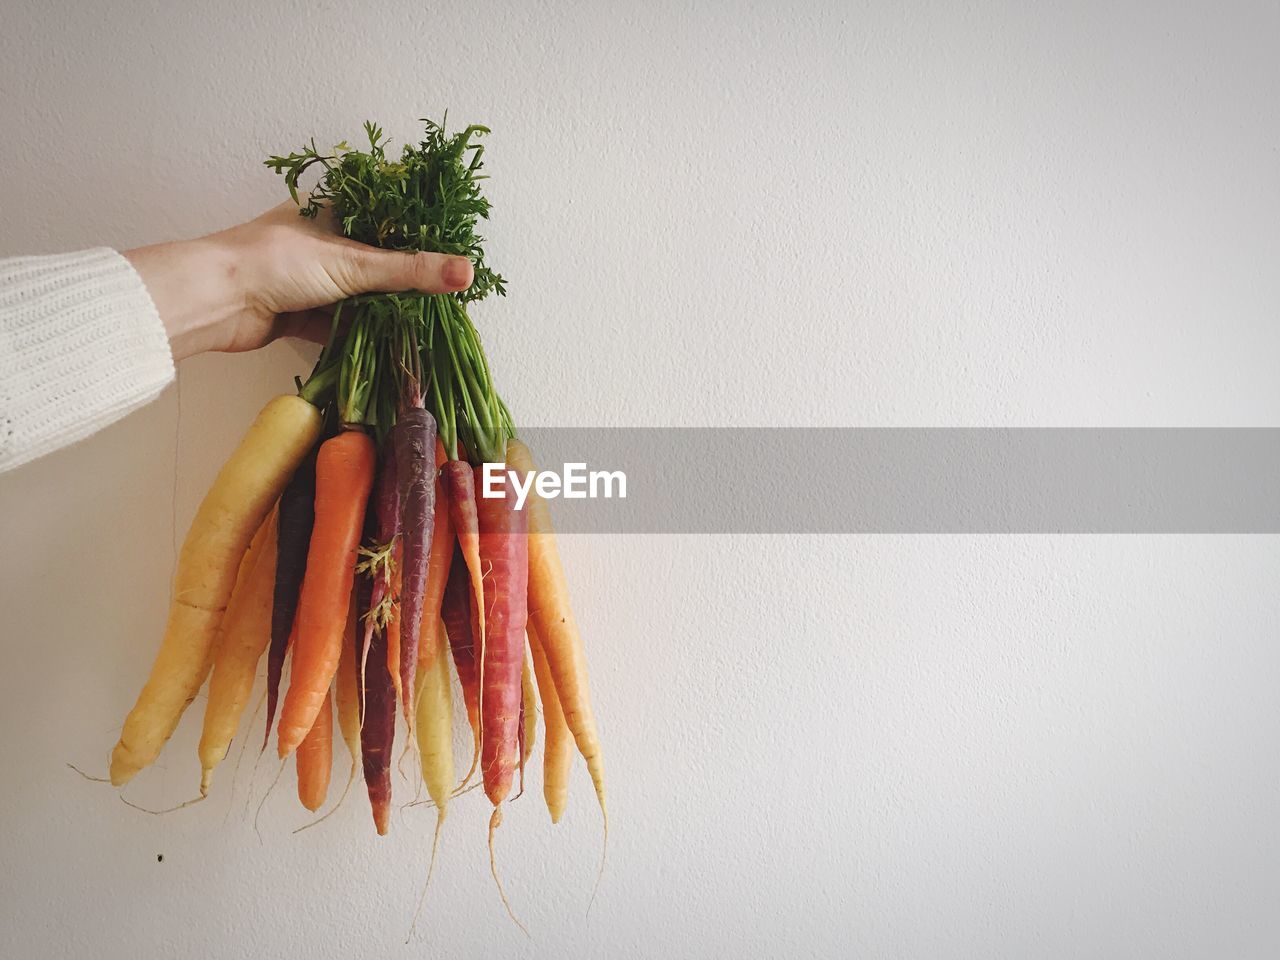 Cropped image of person holding carrots against wall